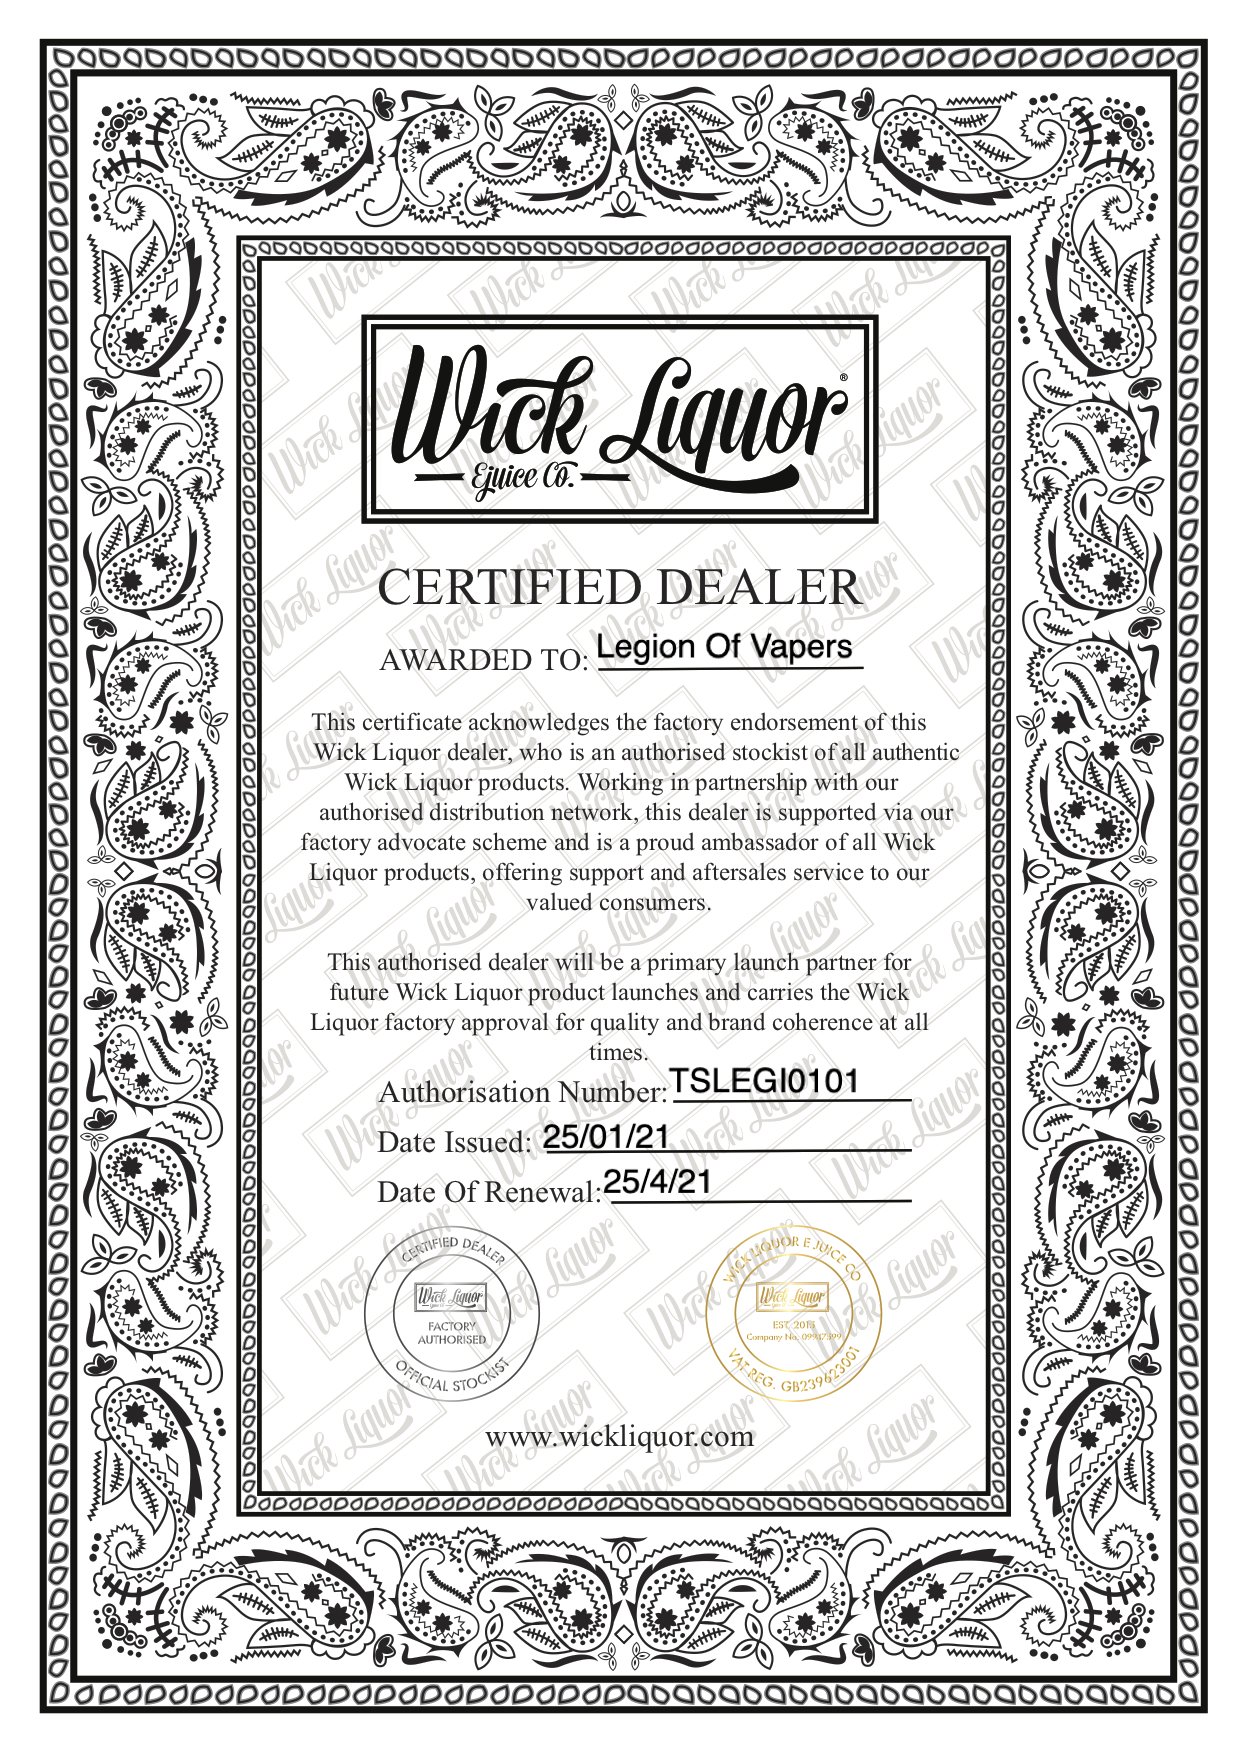 Certificate from Wick Liquor acknowledging and authorising Legion of Vapers as a certified dealer.